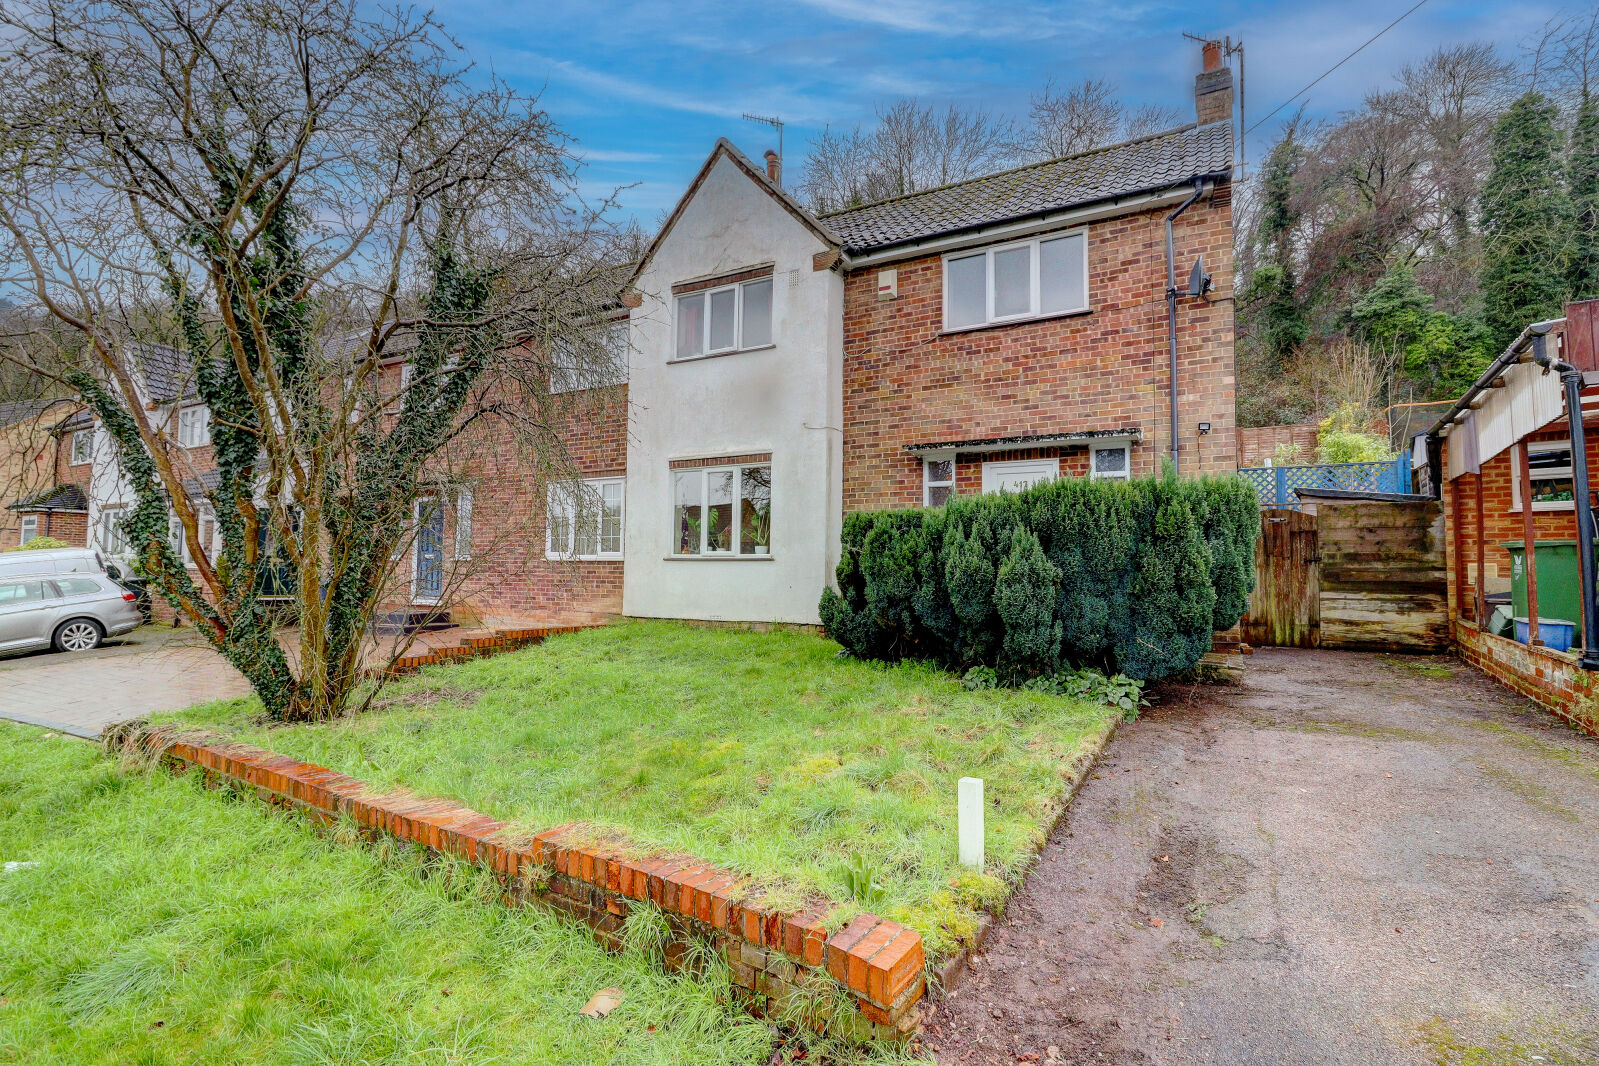 3 bedroom end terraced house for sale Micklefield Road, High Wycombe, HP13, main image